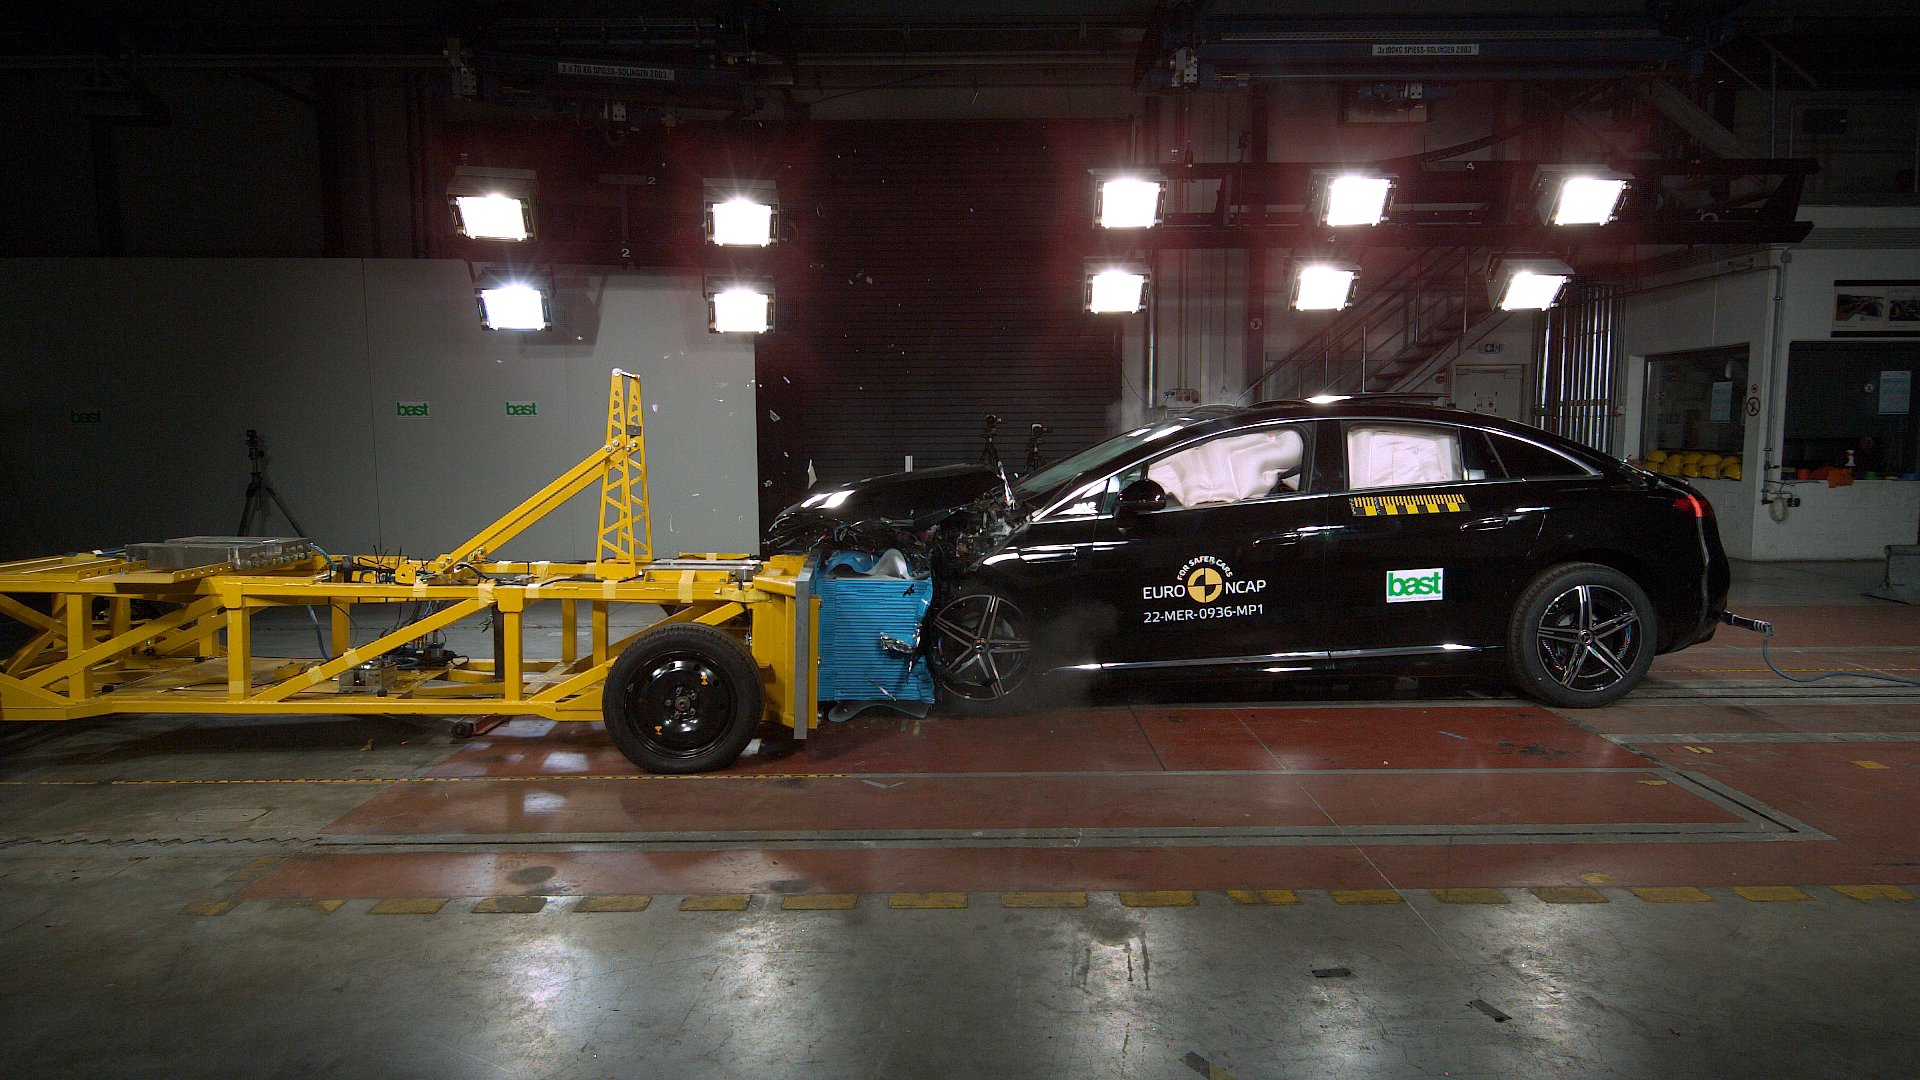 New Tesla Model S gets 5-Star Safety Rating from the Euro NCAP